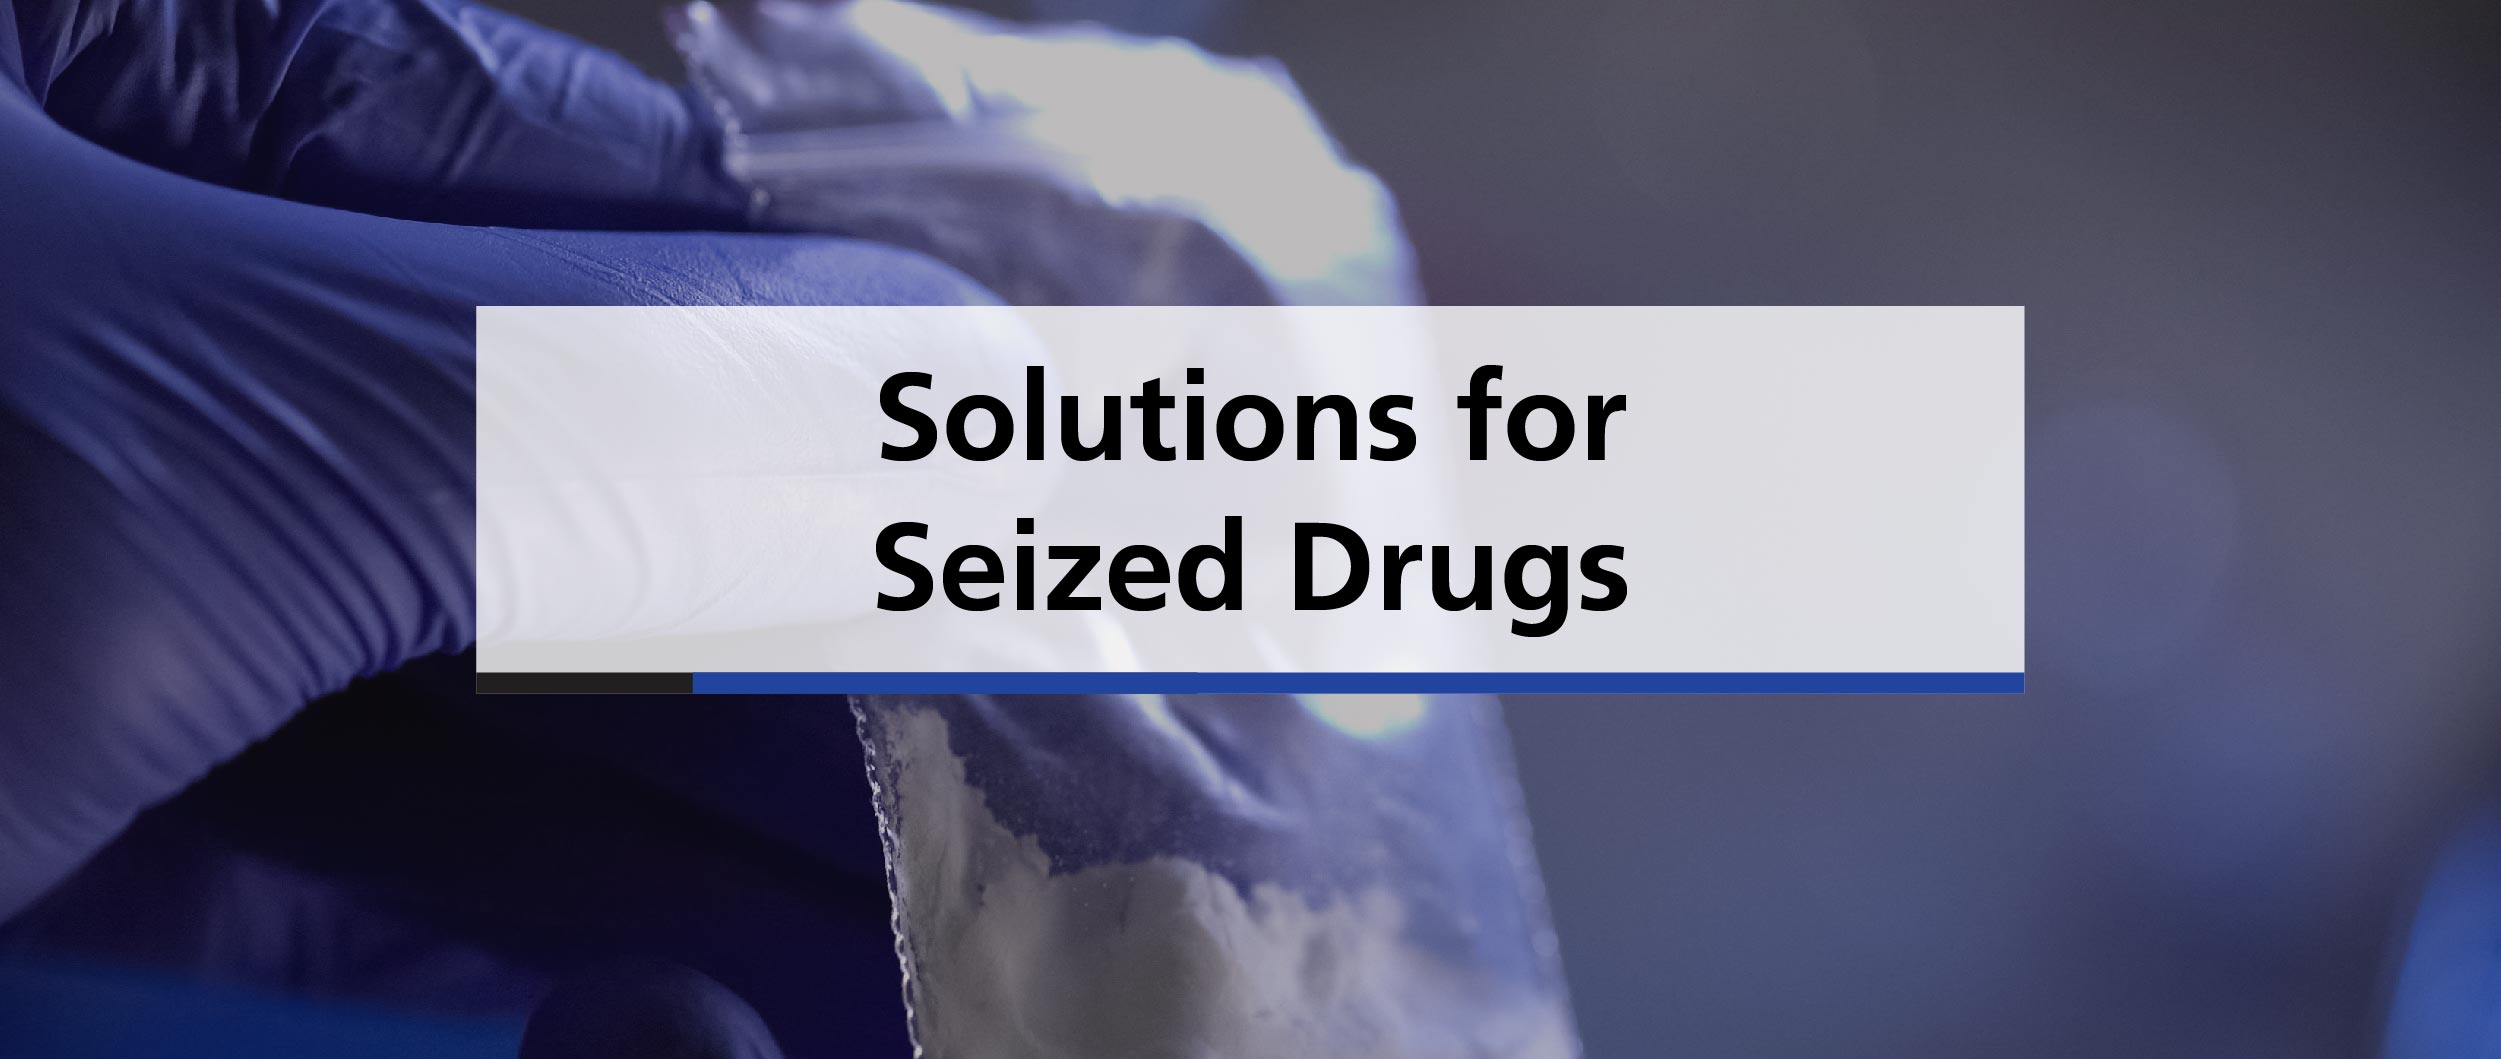 Solutions for Seized Drugs